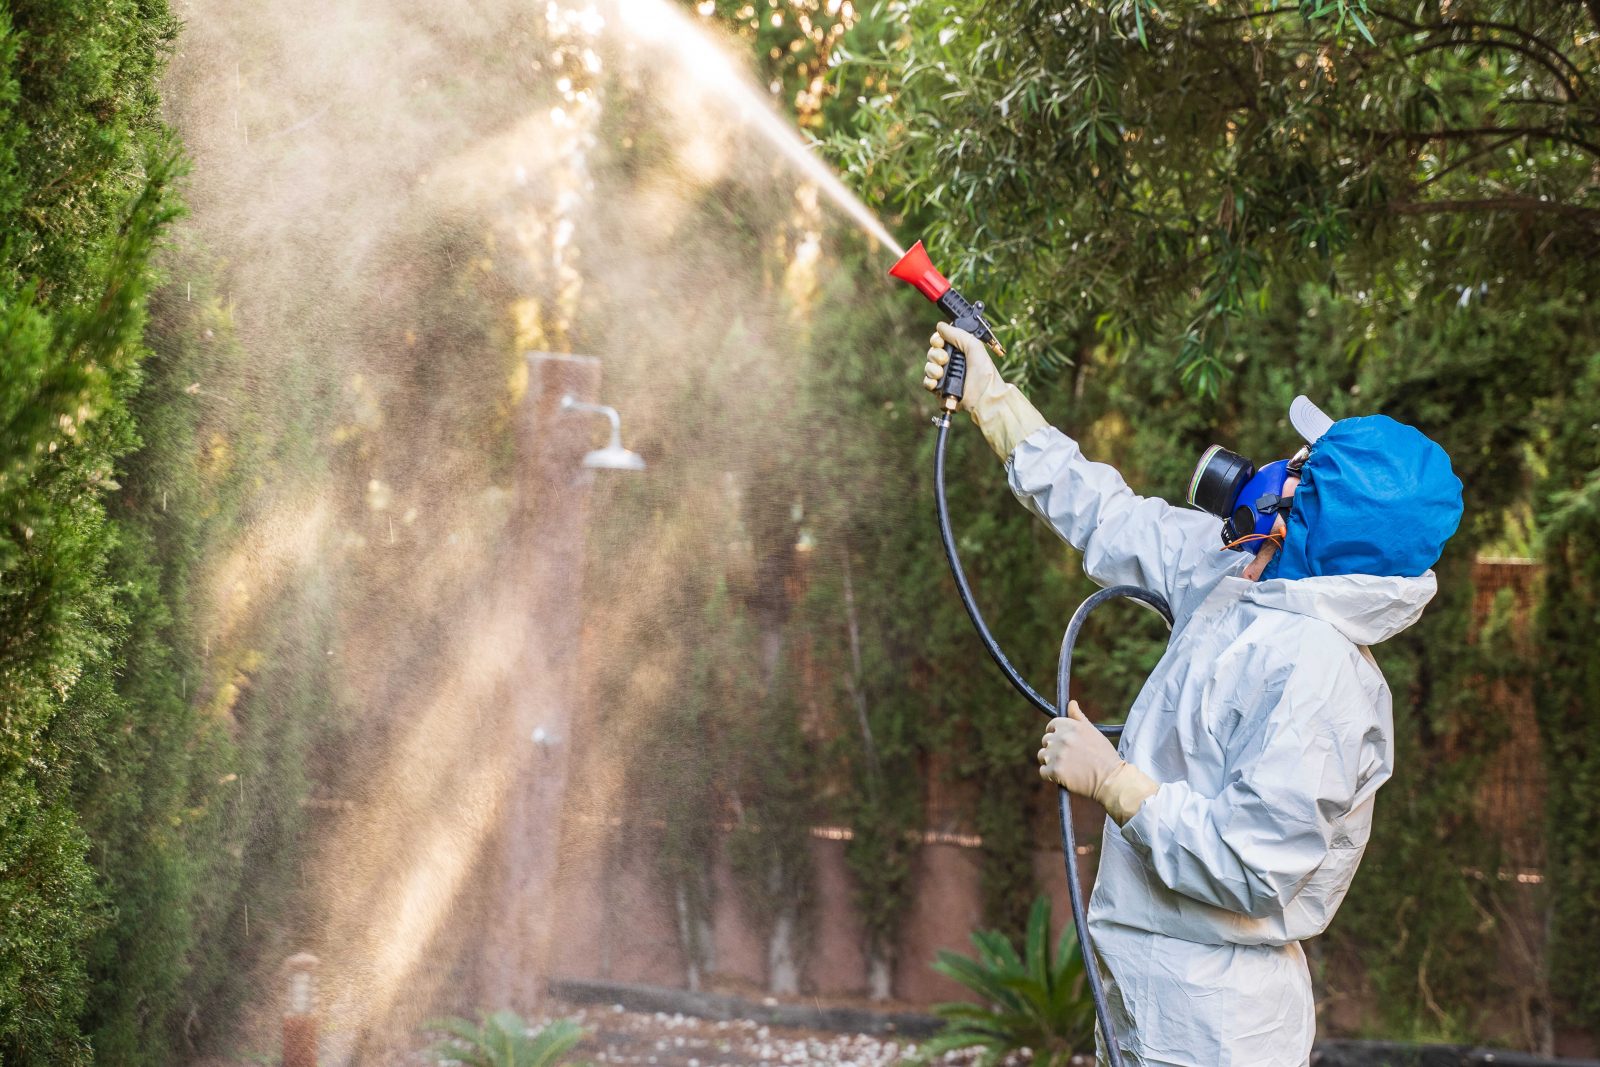 How safe are pest control products today?